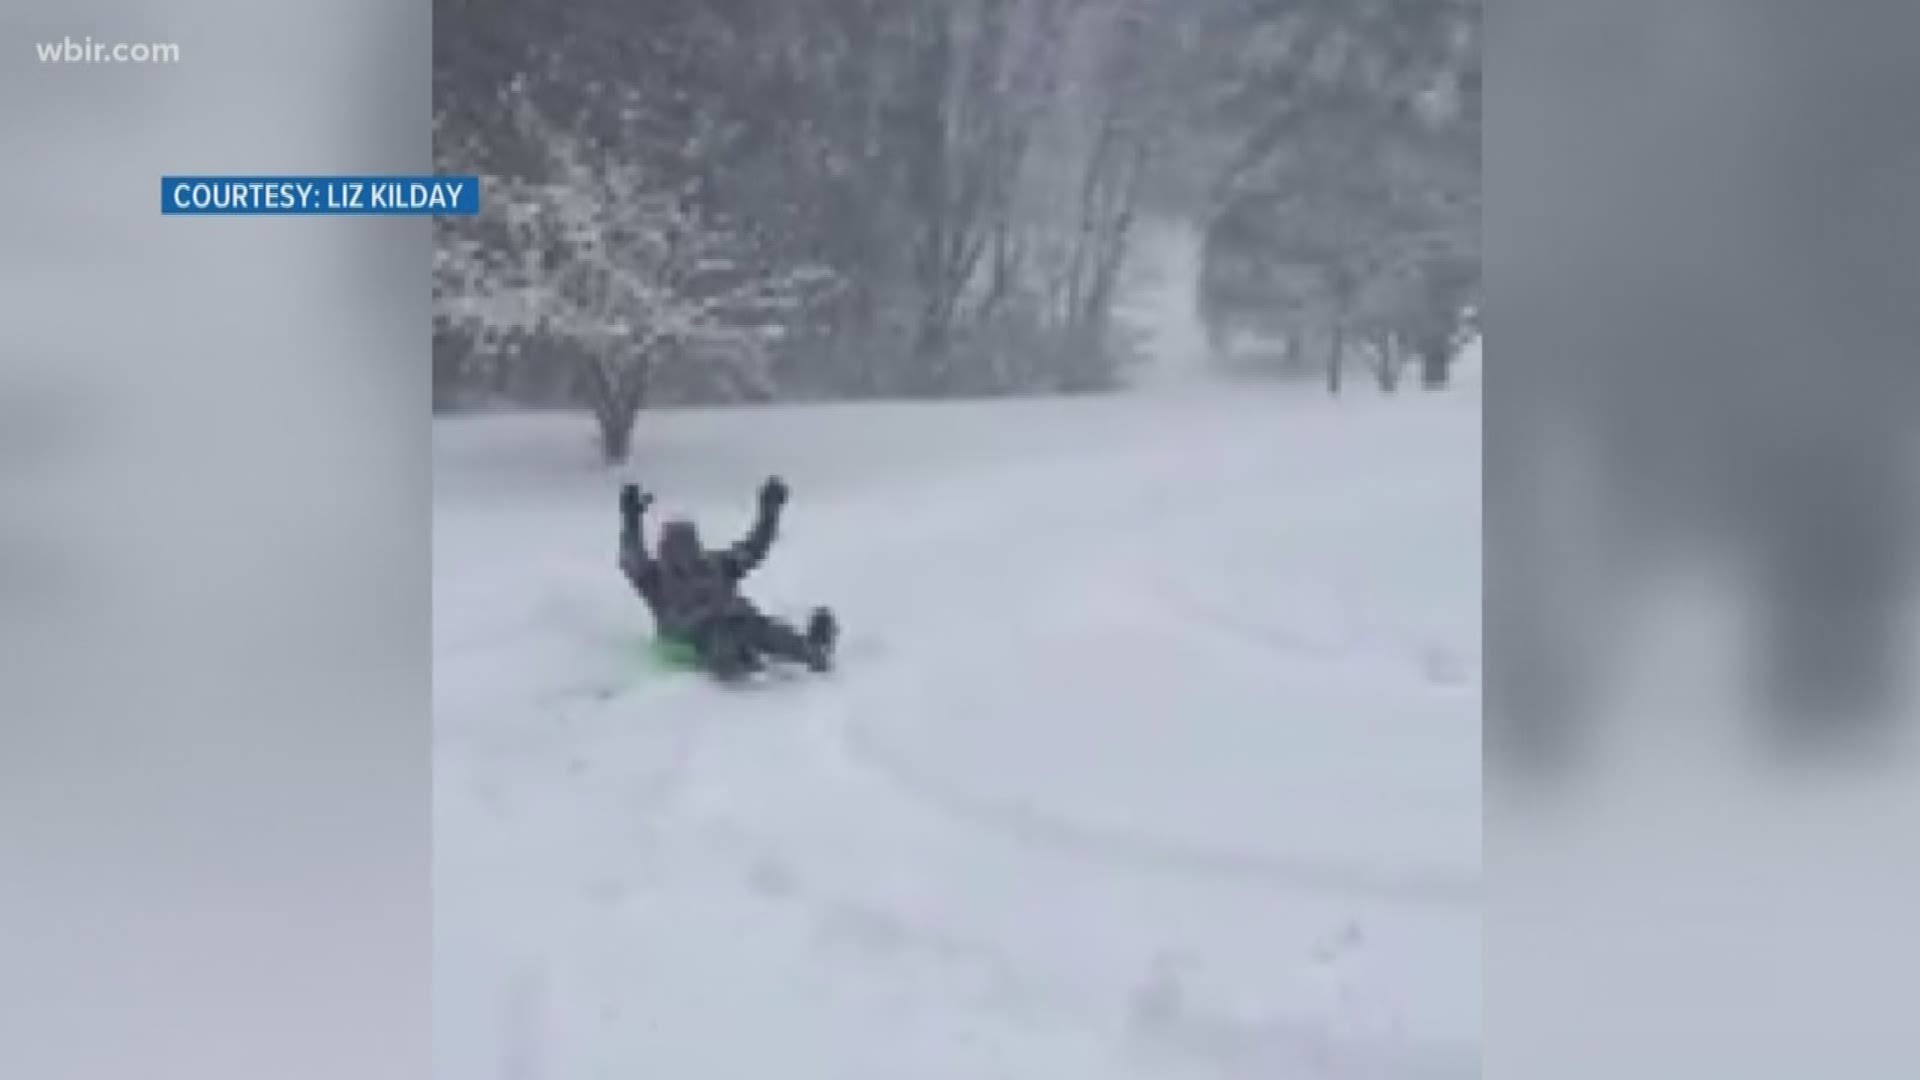 Jack Stout enjoys a snow day at his home in Mountain City, Tennessee. His daughter shared the video with us.
Dec. 10, 2018-4pm